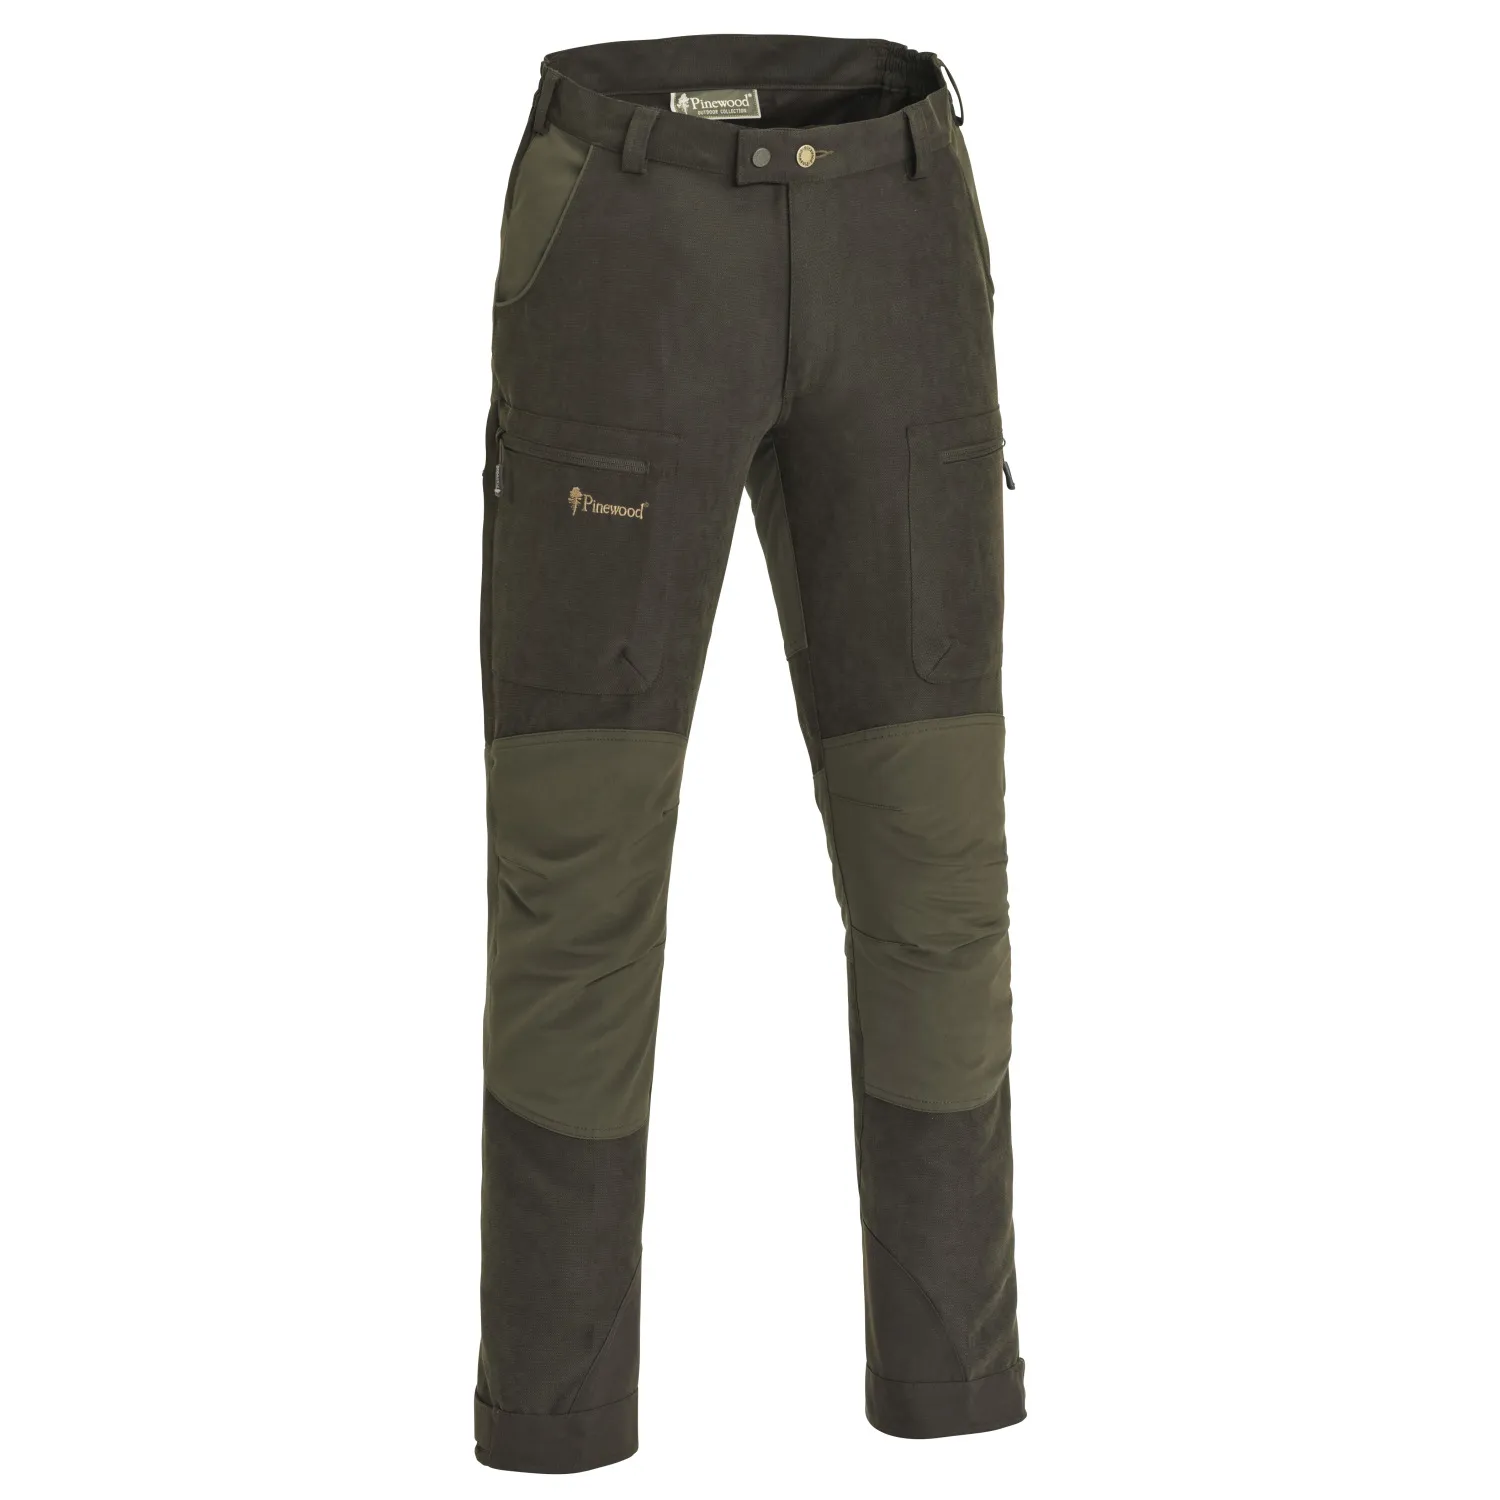 08_5986-244-1-Trousers Caribou Hunt Extreme - Suede Brown D Olive (519).jpg